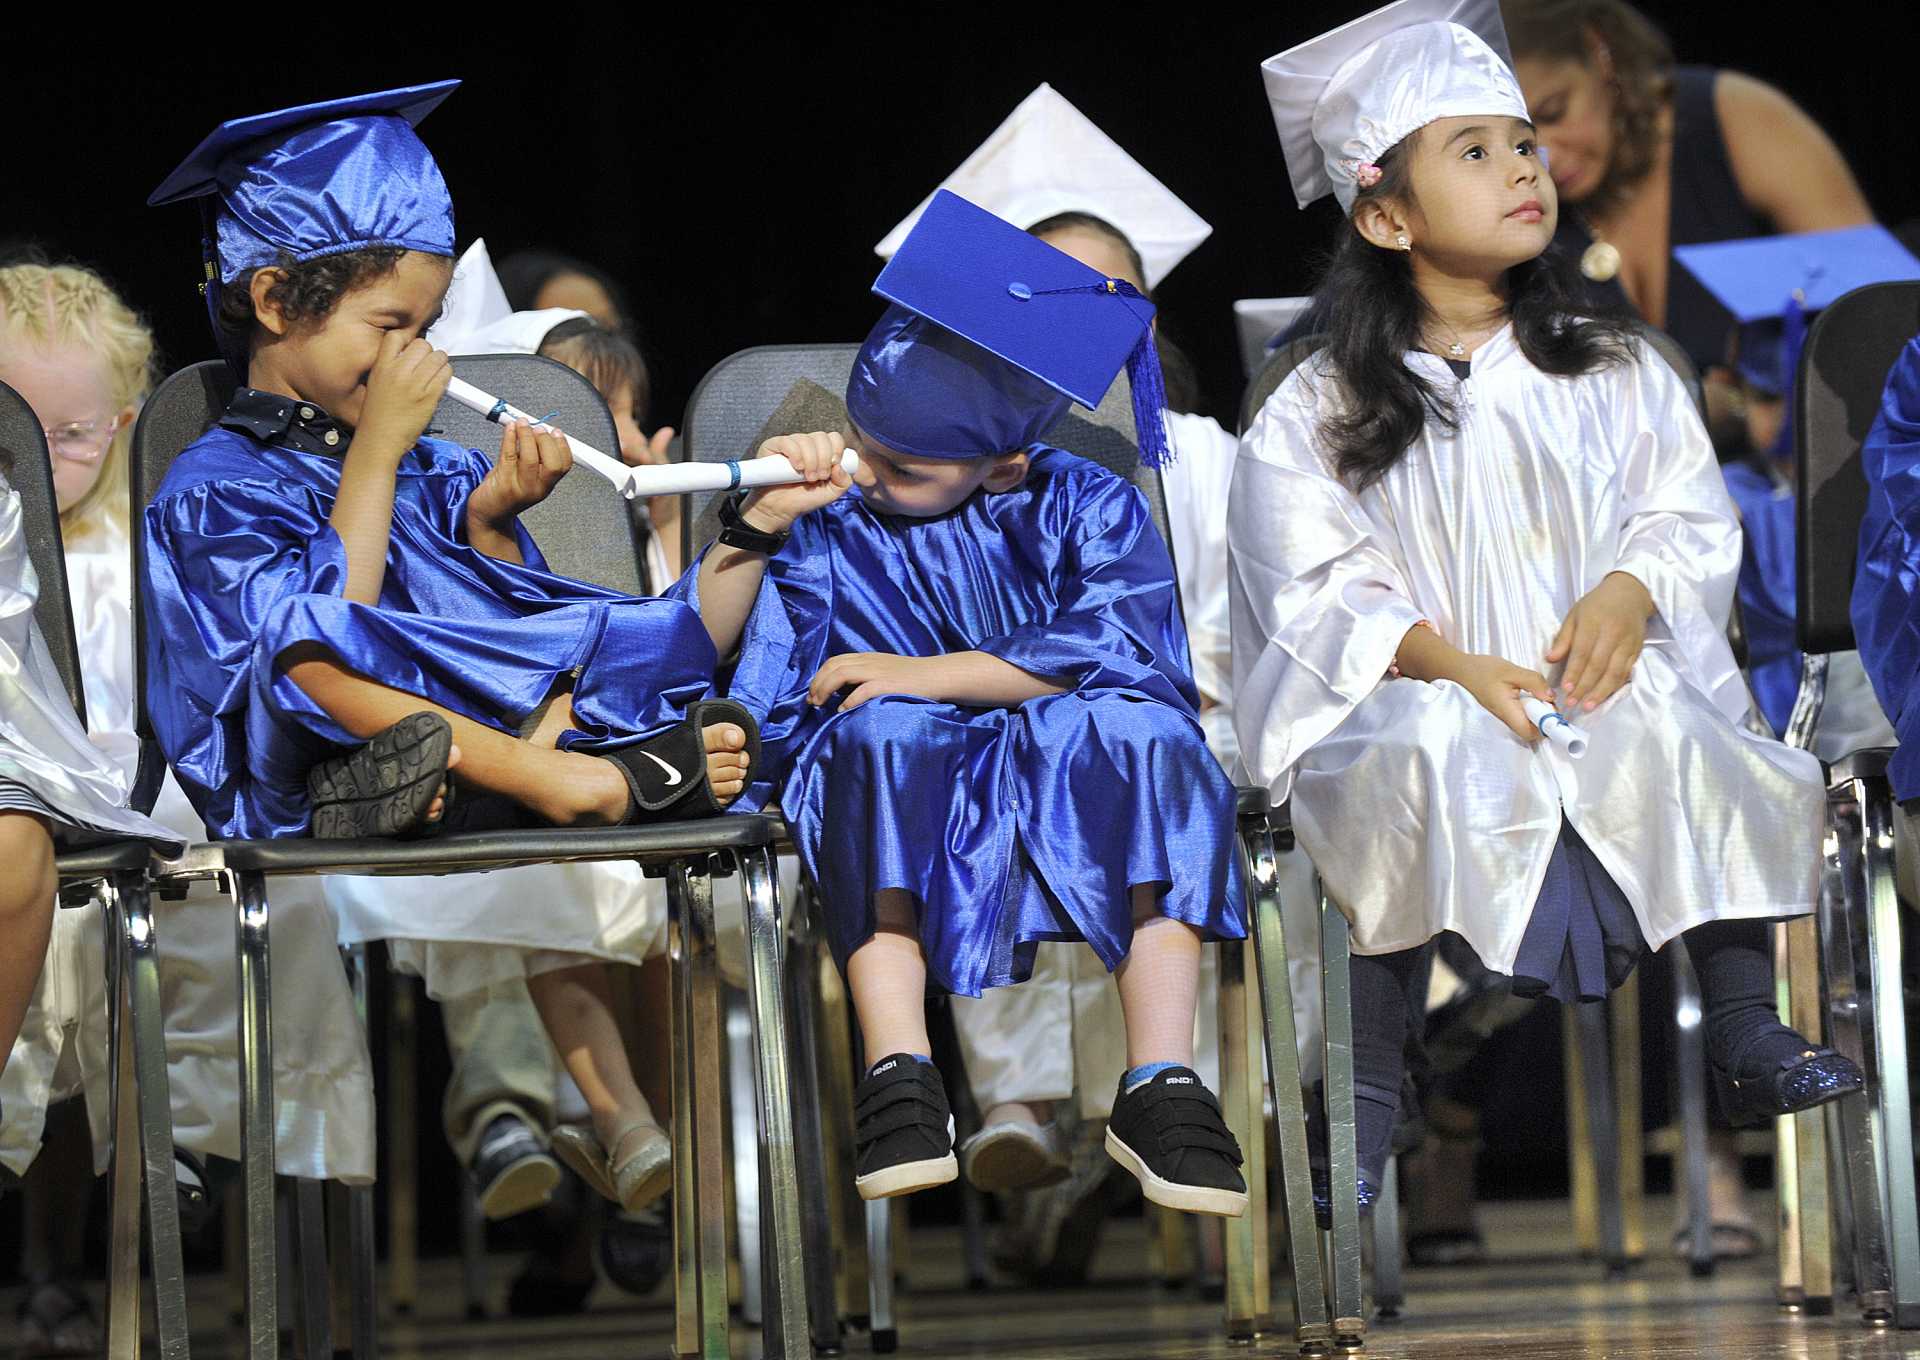 Preschoolers make telescopes out of their diplomas at their graduation ceremony.